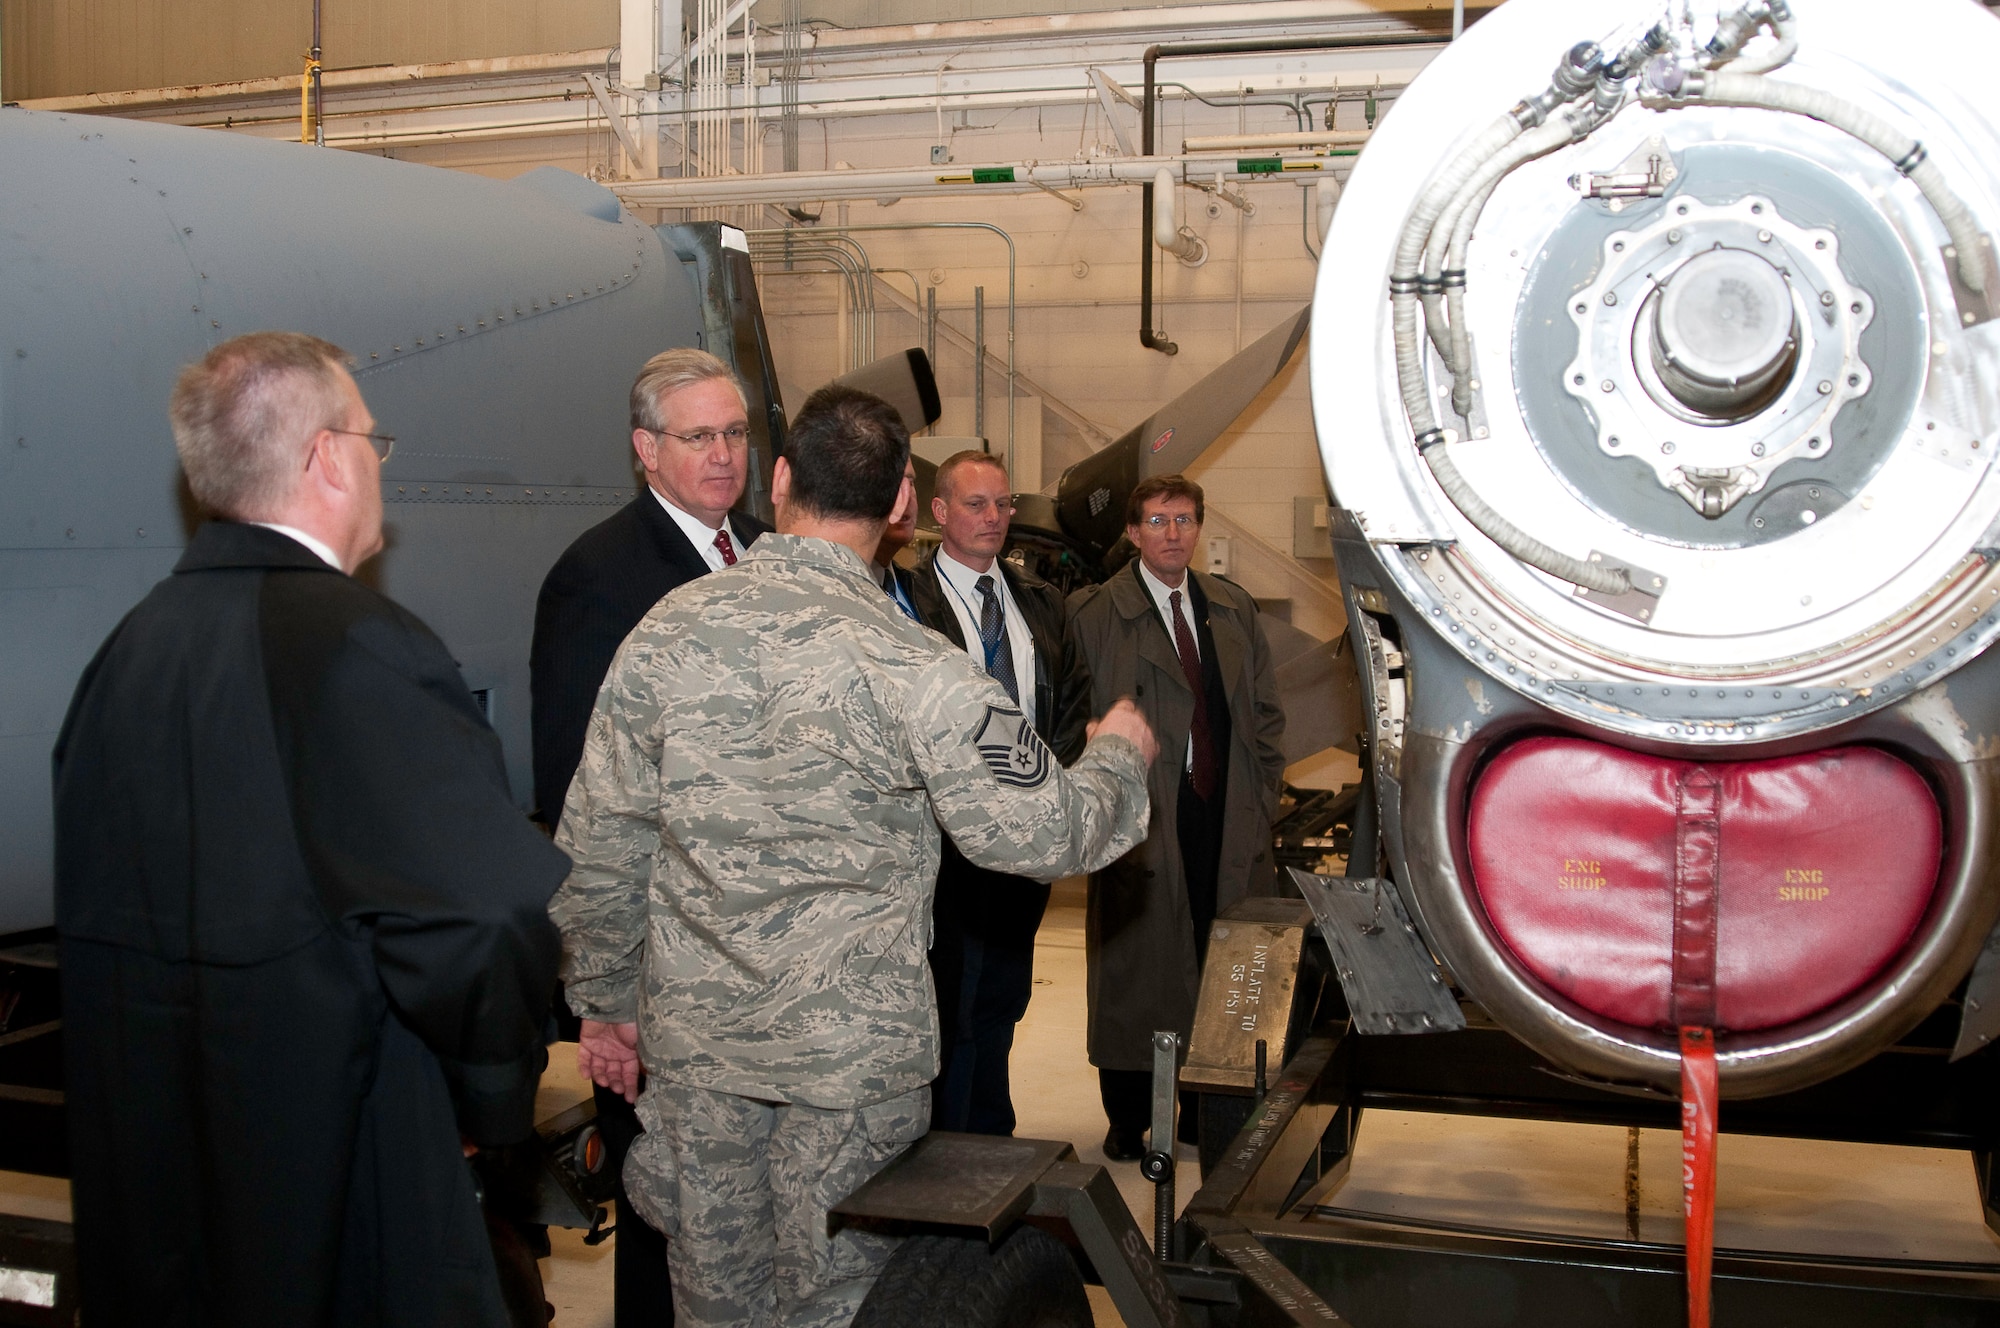 Governor Nixon visits 139th Airlift Wing in February, 2010. (U.S. Air Force photo by Master Sgt. Shannon Bond/Released)
